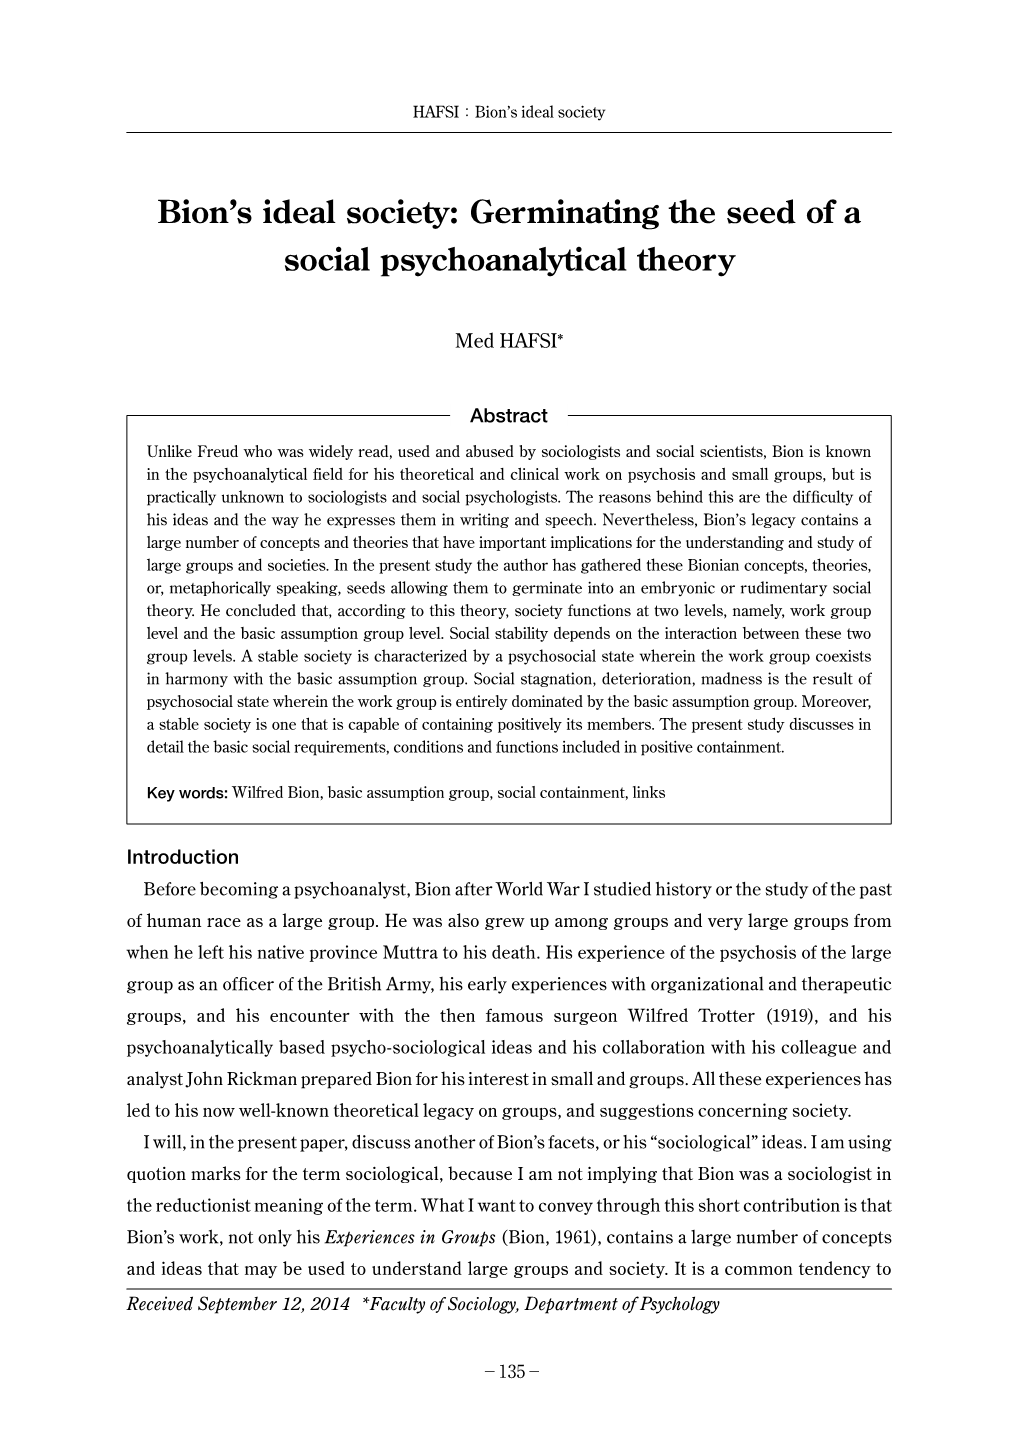 Bion's Ideal Society: Germinating the Seed of a Social Psychoanalytical